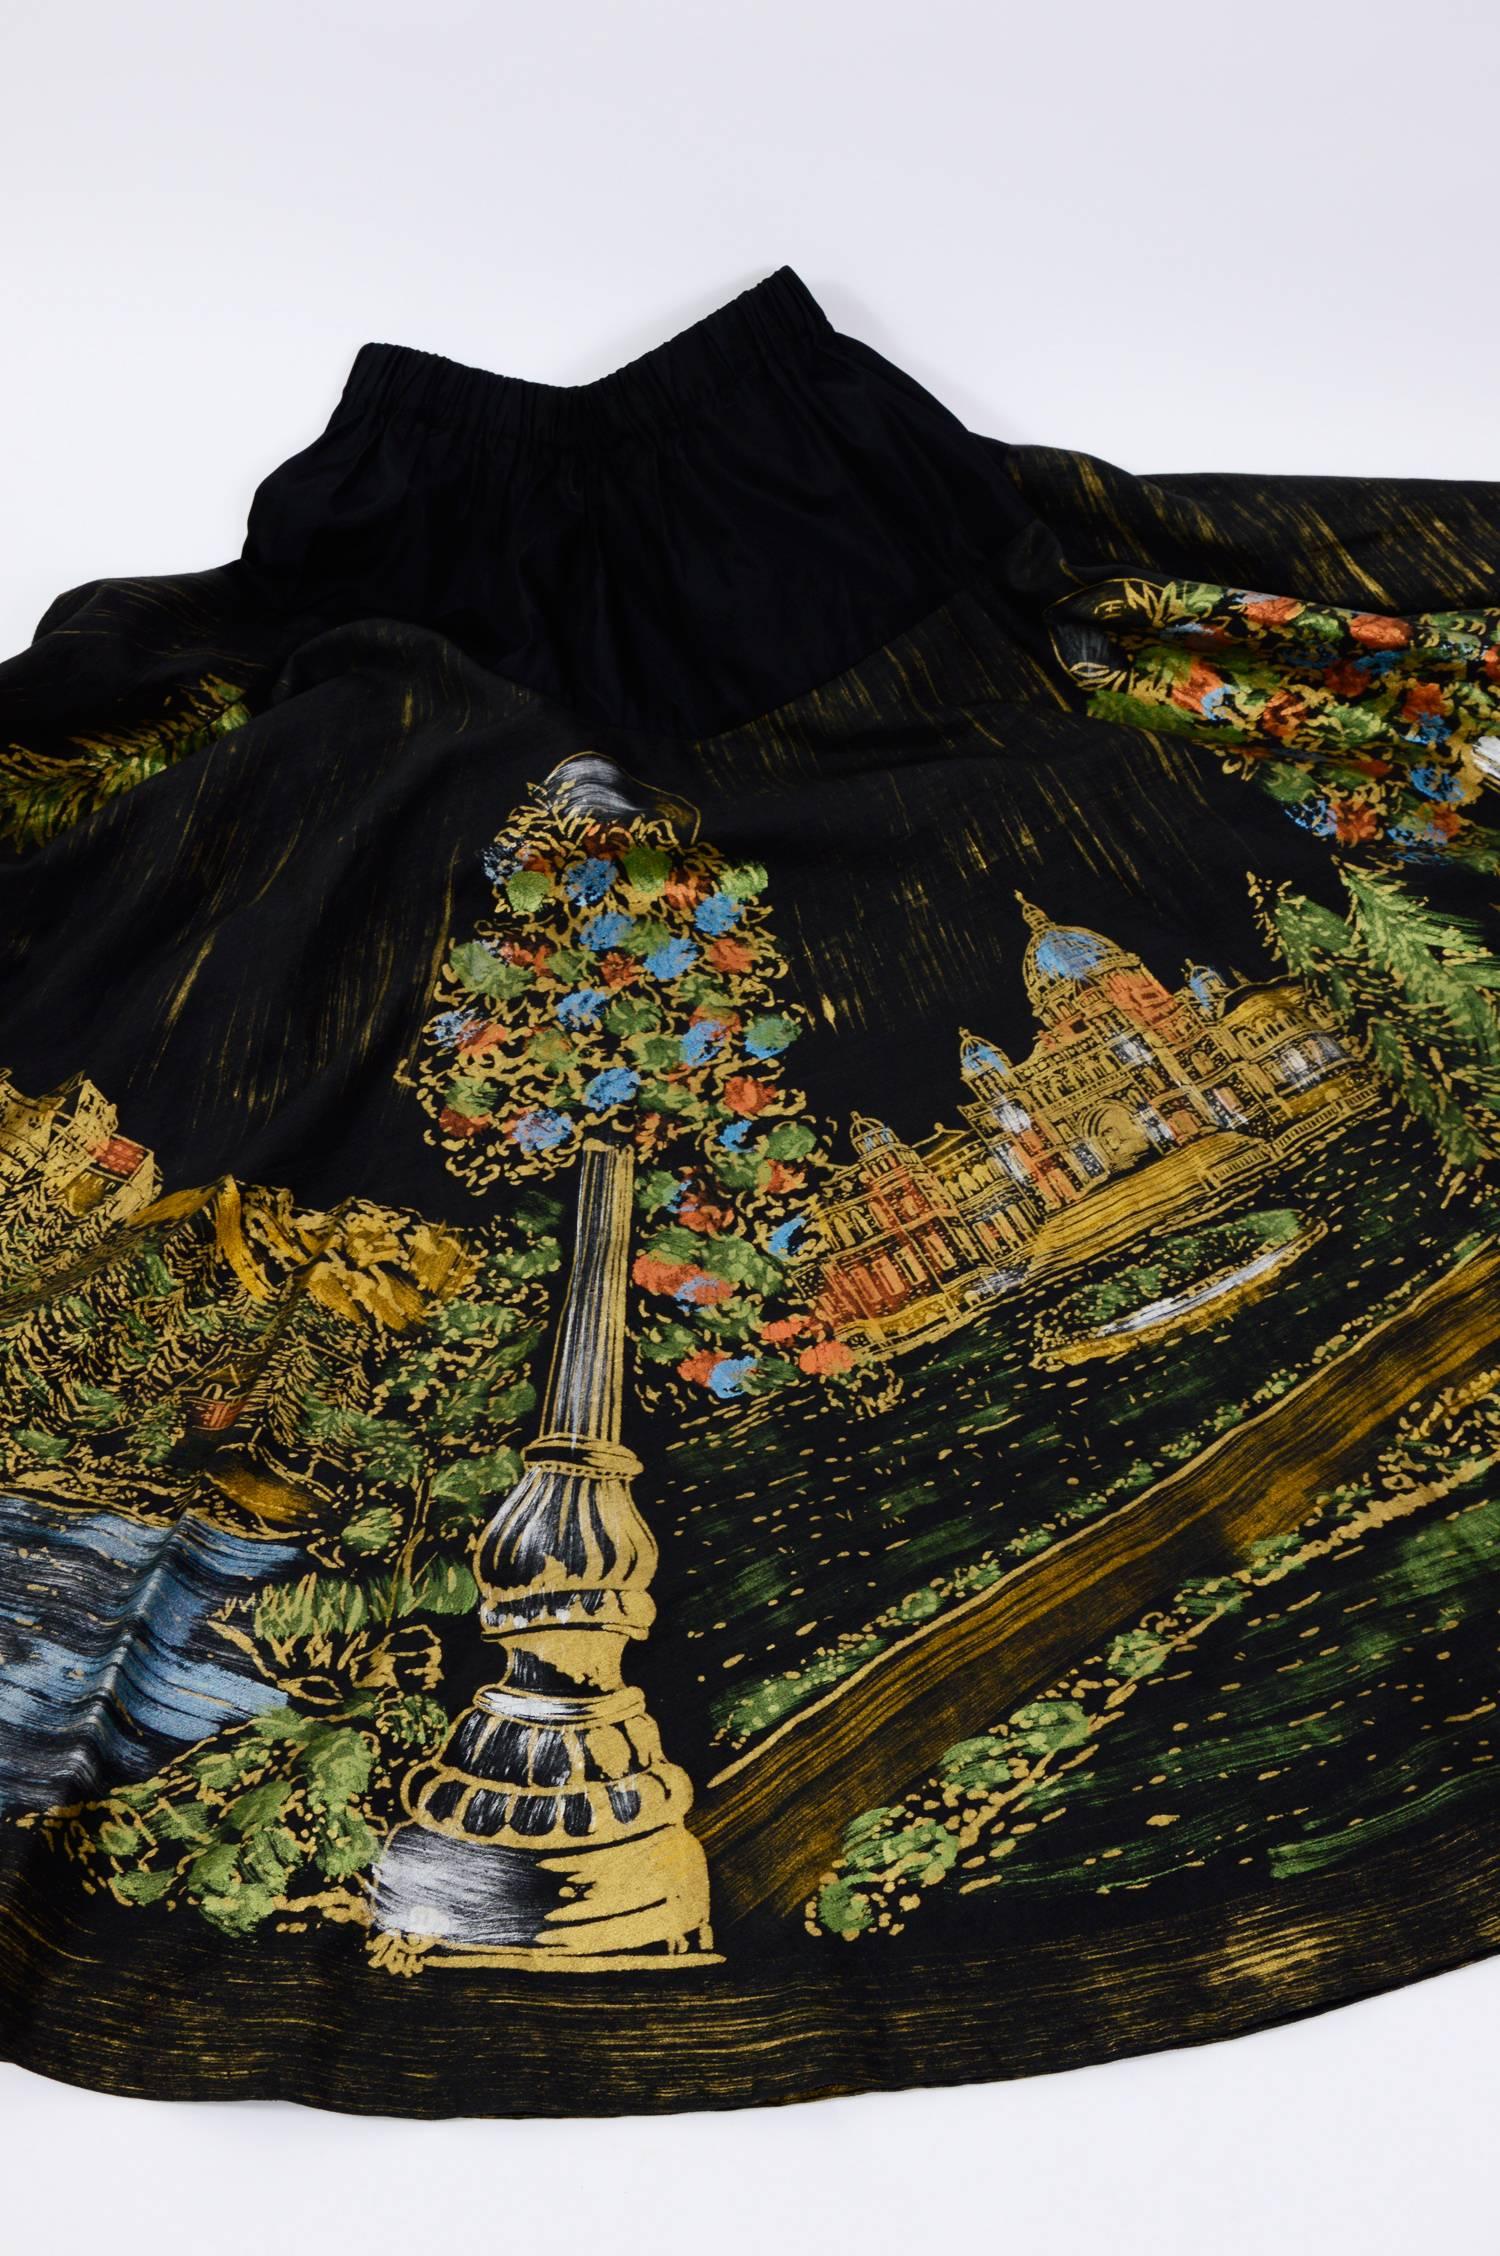 Black Vintage 1950s hand painted Mexican Victoria Vancouver scenery print circle skirt